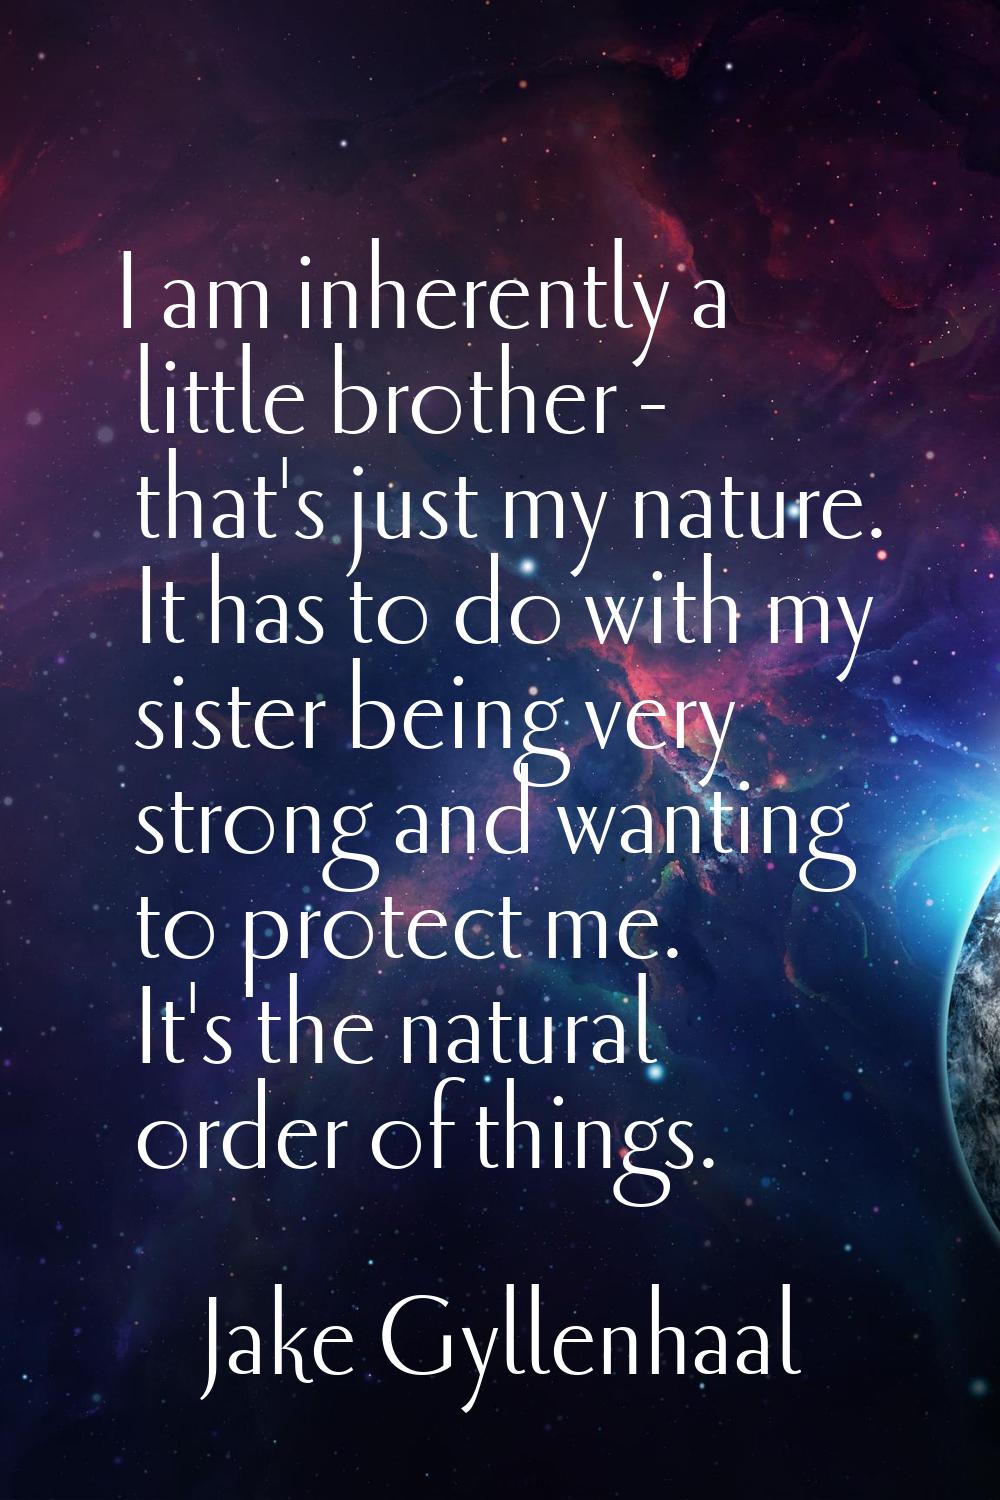 I am inherently a little brother - that's just my nature. It has to do with my sister being very st